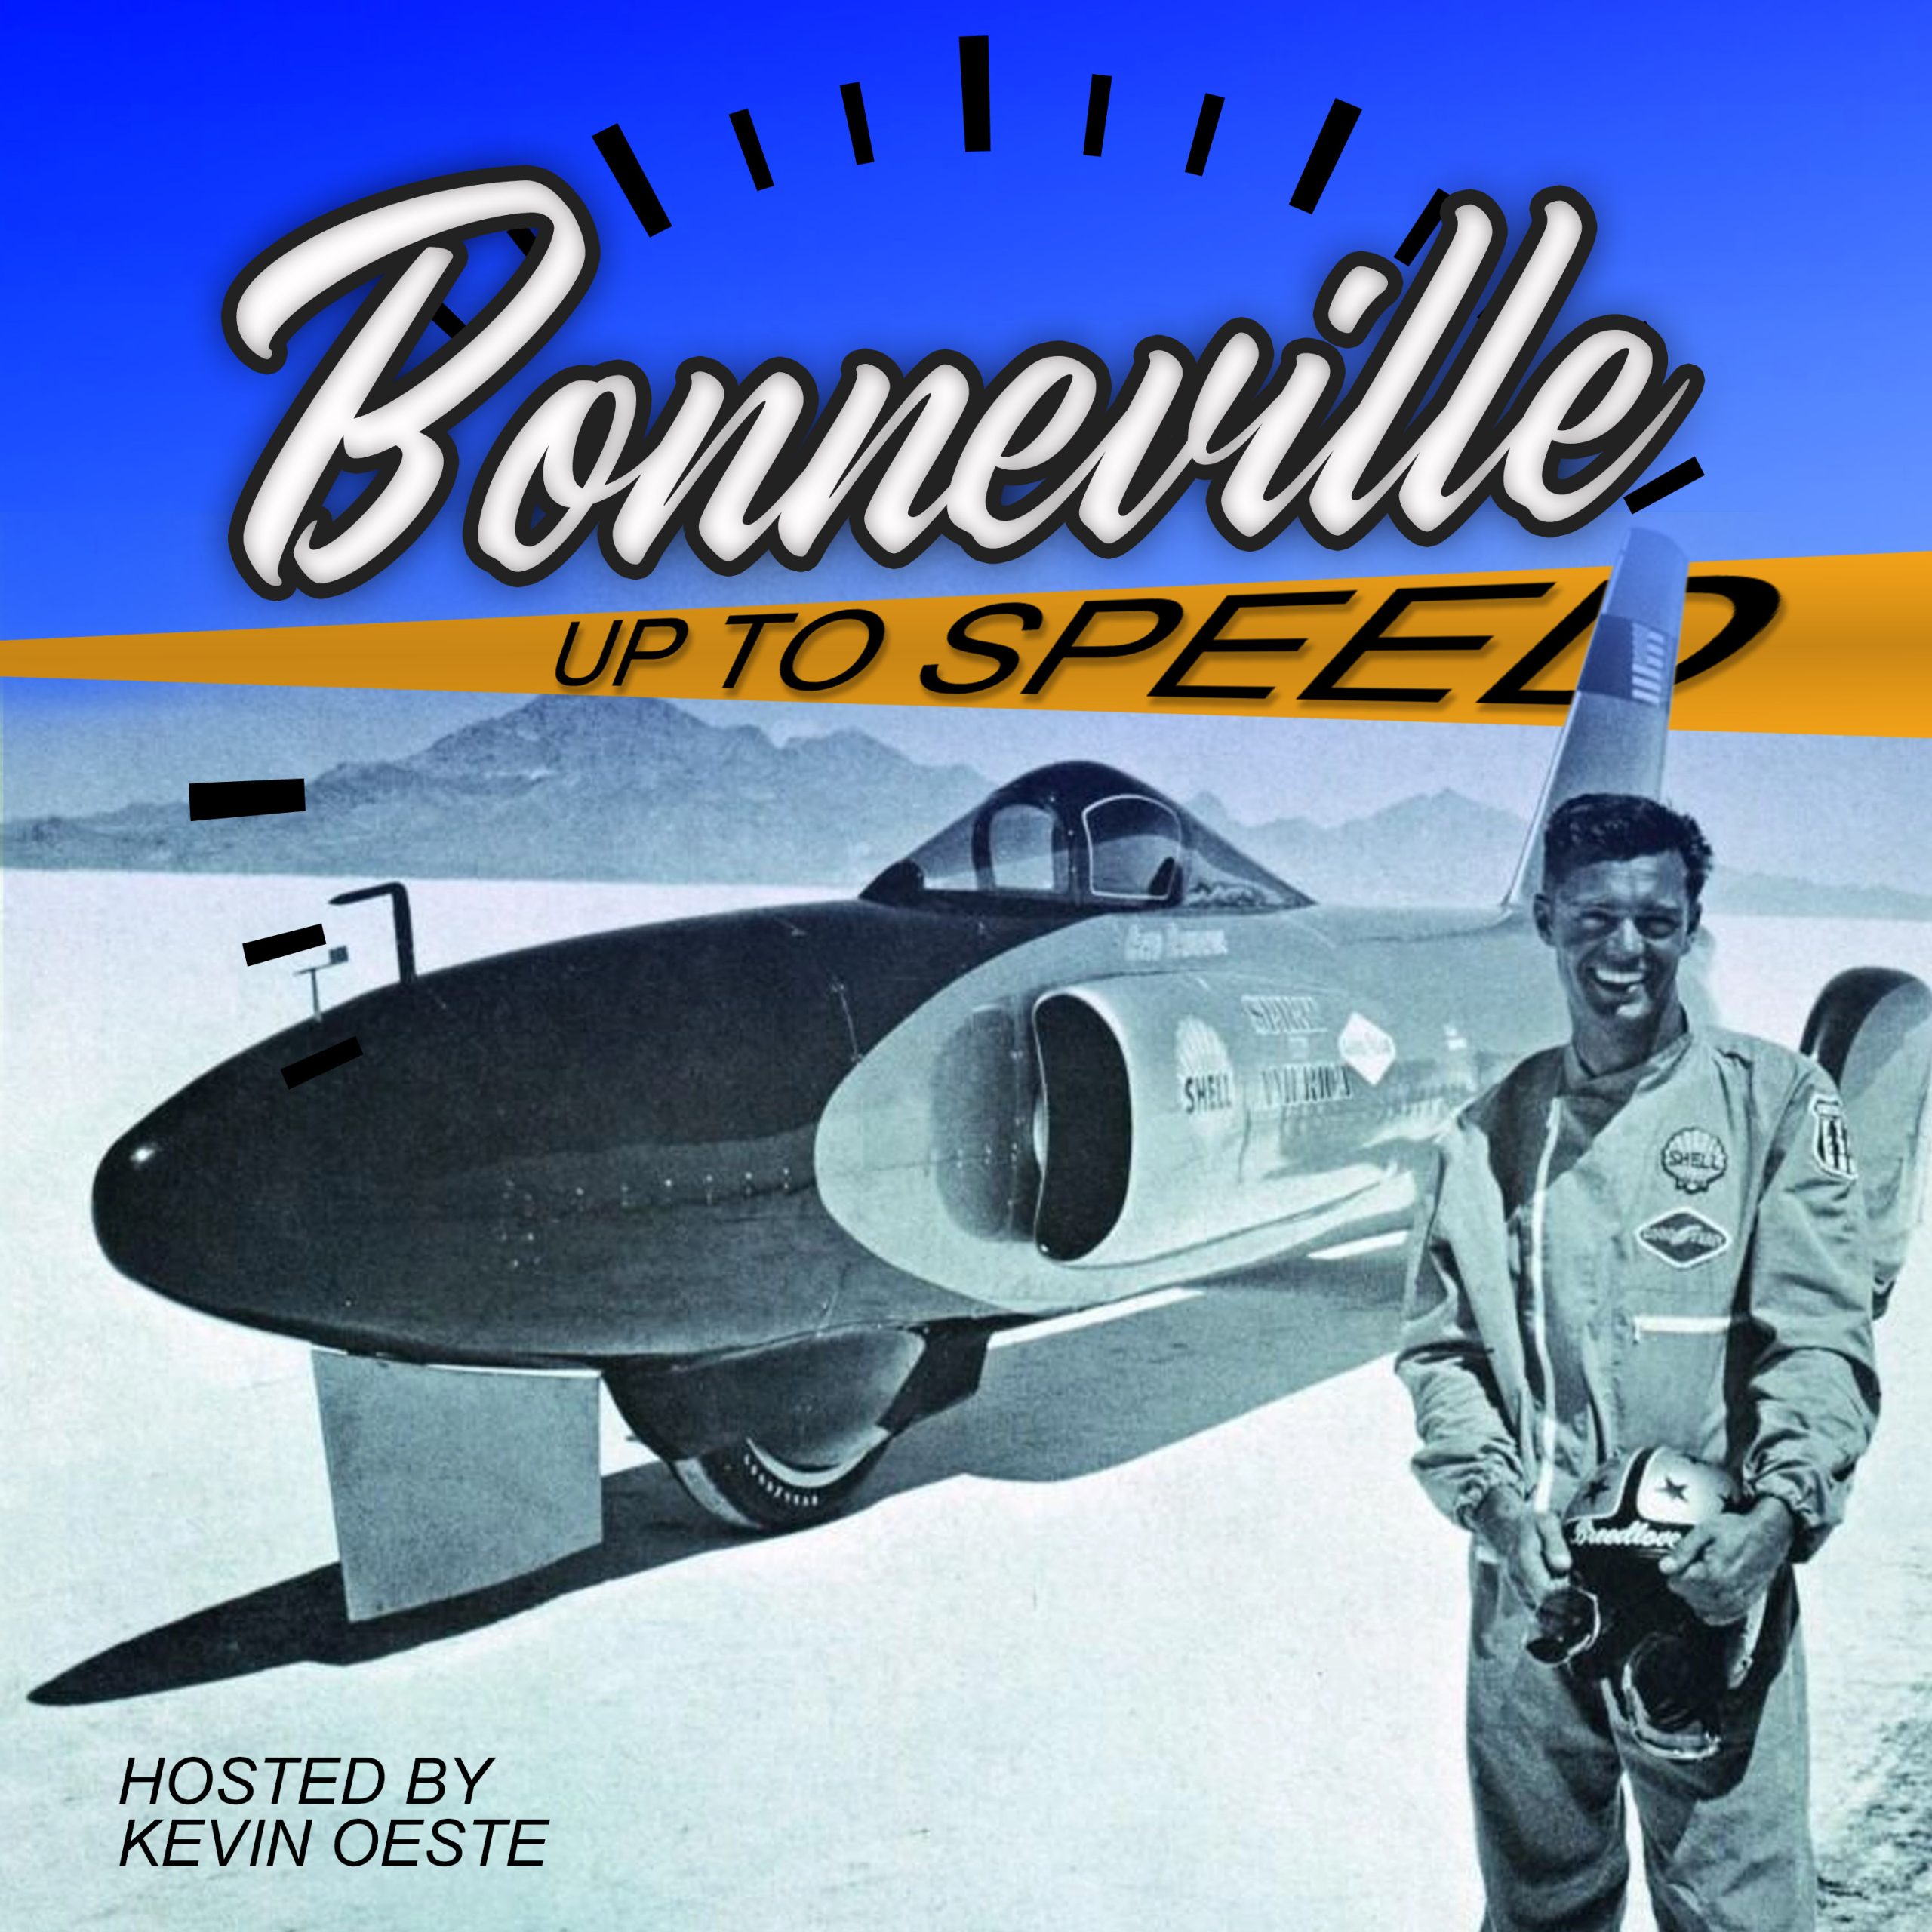 The Story of Craig Breedlove Setting The World Land Speed Record in Sprit Of America Straight From 1963 on the Bonneville Up To Speed Podcast